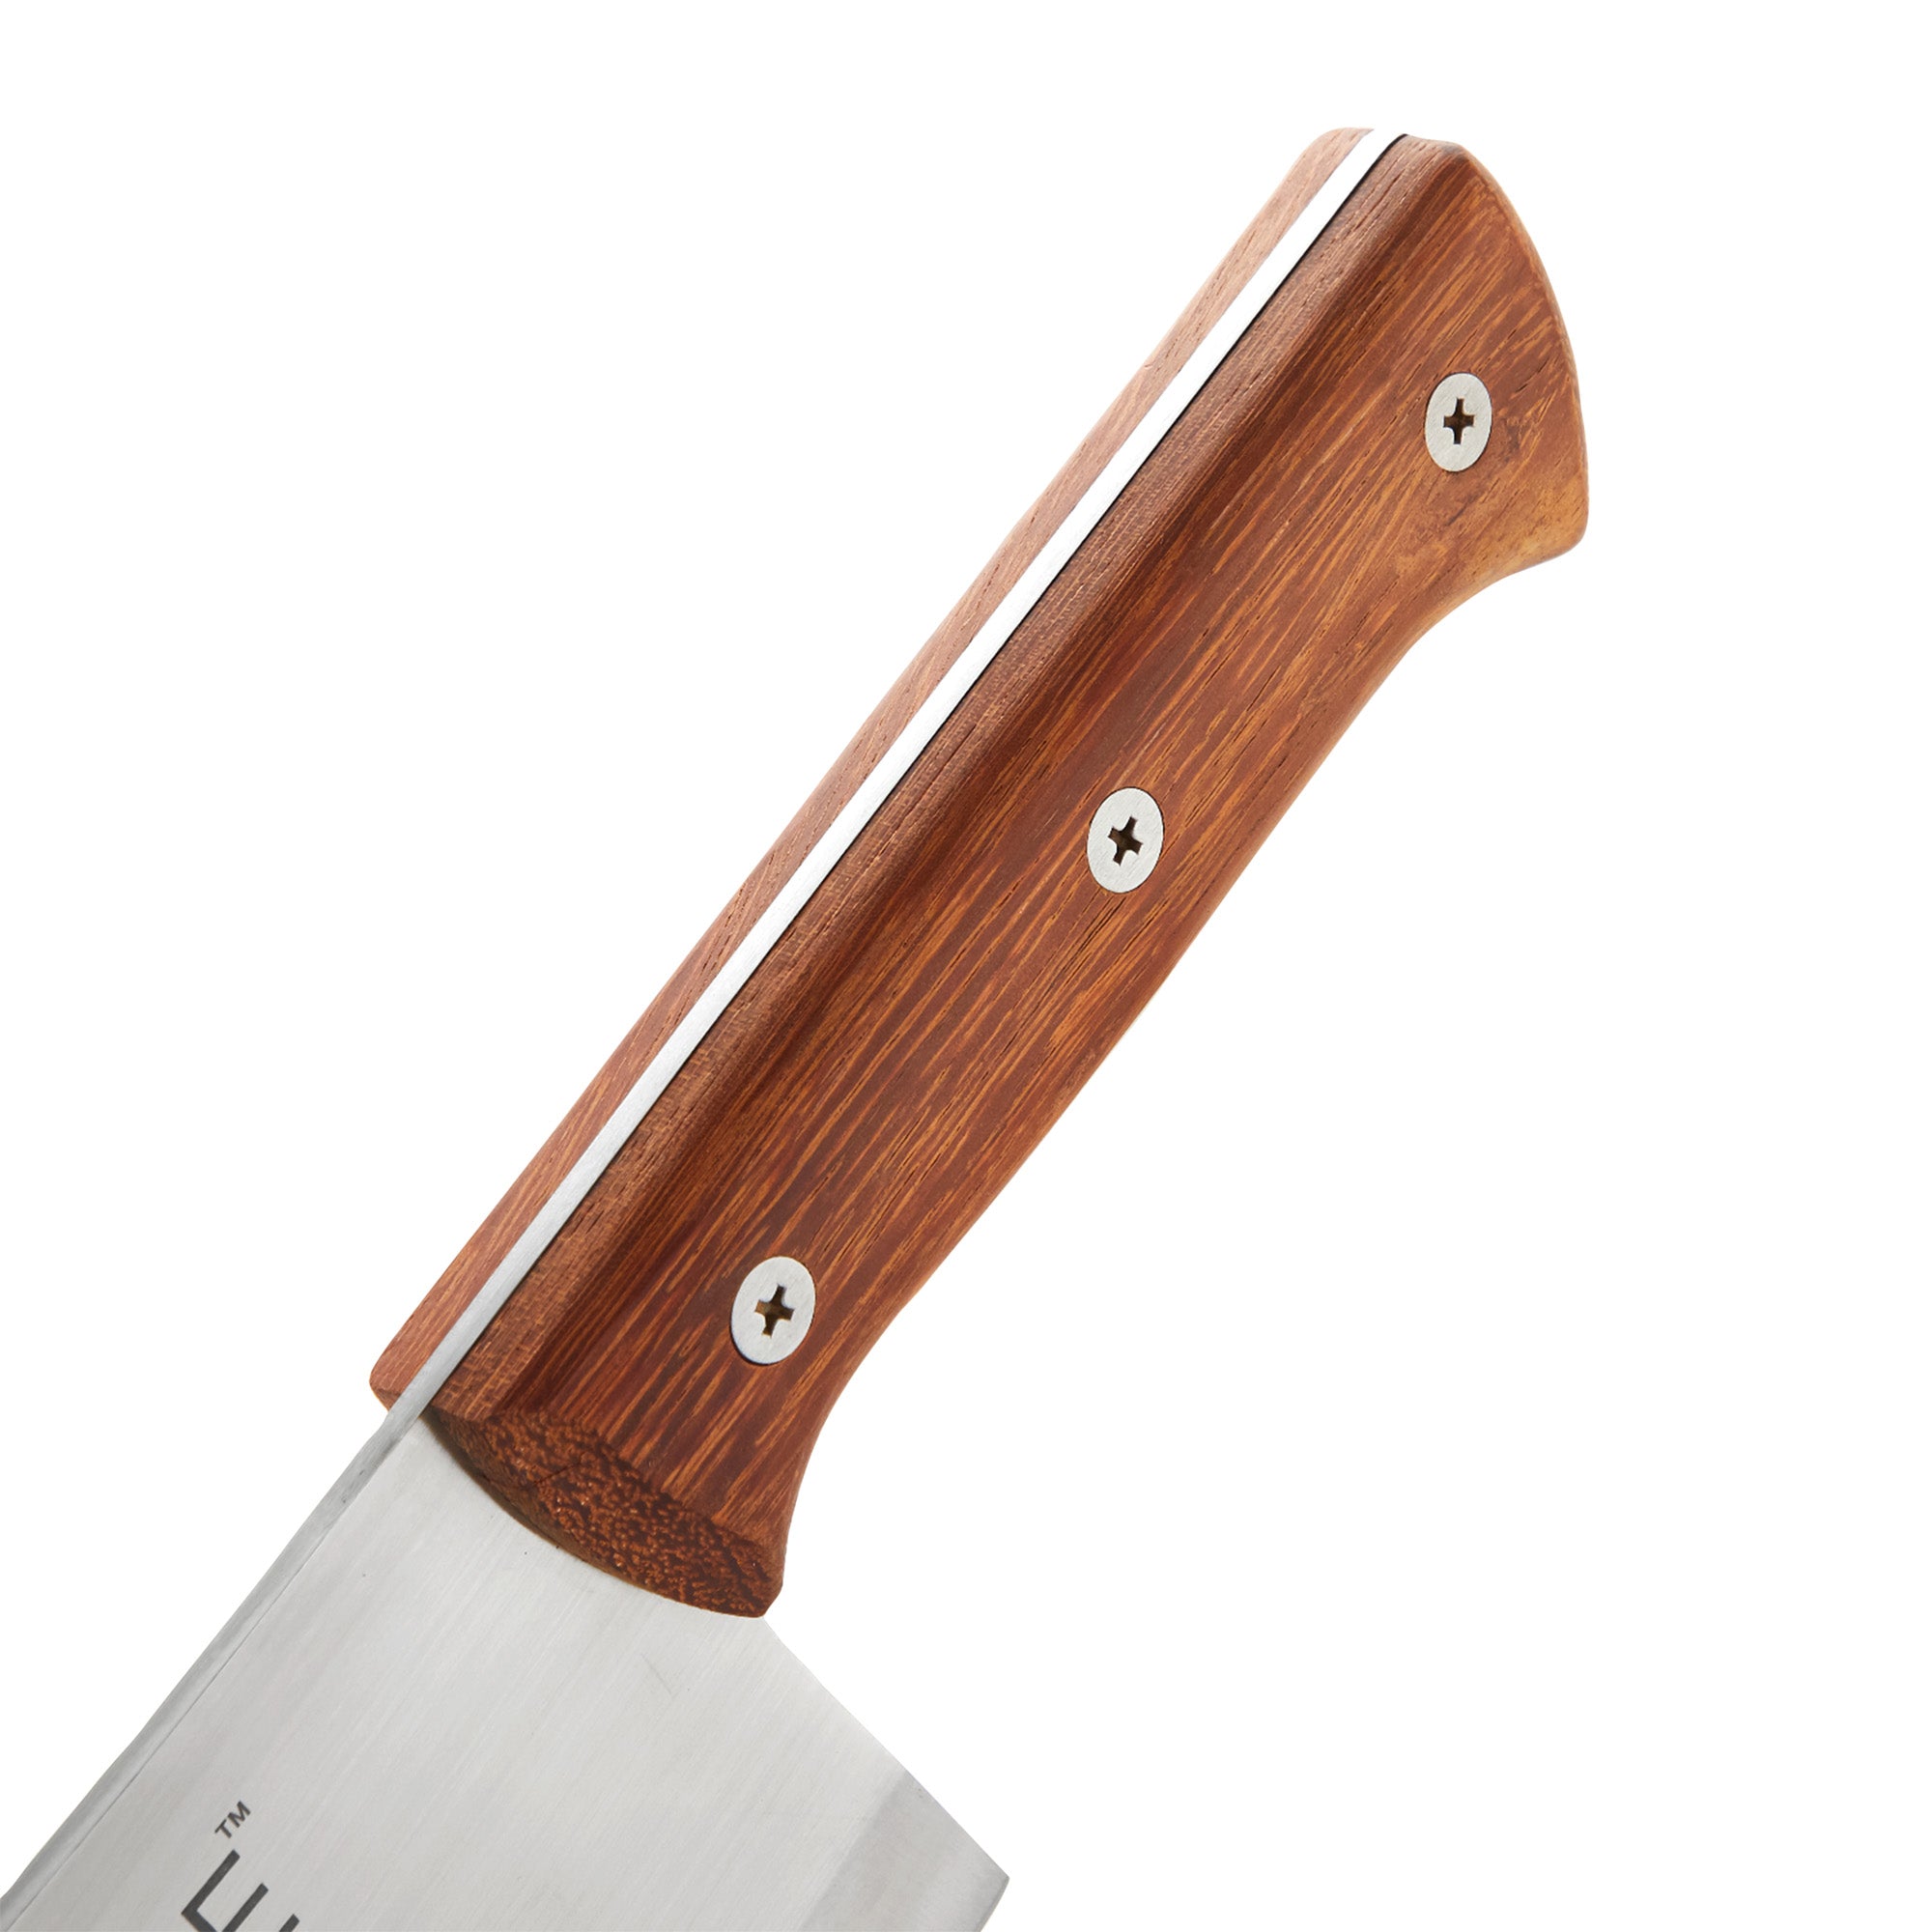 Meat Cleaver Knife, 8 Inch